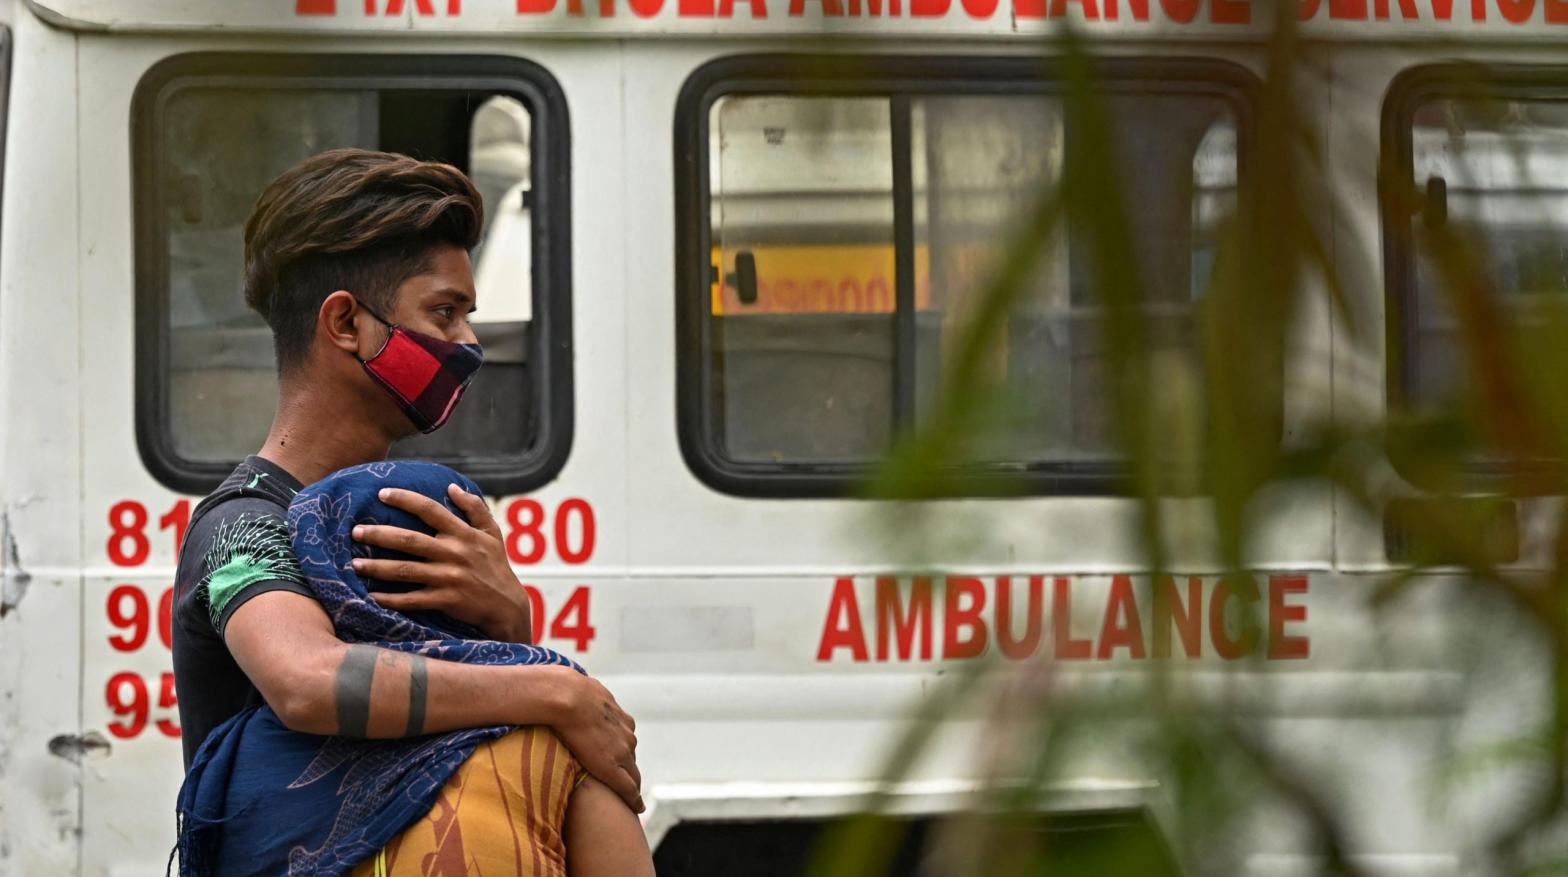 Family members mourn after they received the body of a patient who died of covid-19 at a mortuary in New Delhi, India on May 18, 2021. (Photo: Sajjad Hussain/AFP, Getty Images)